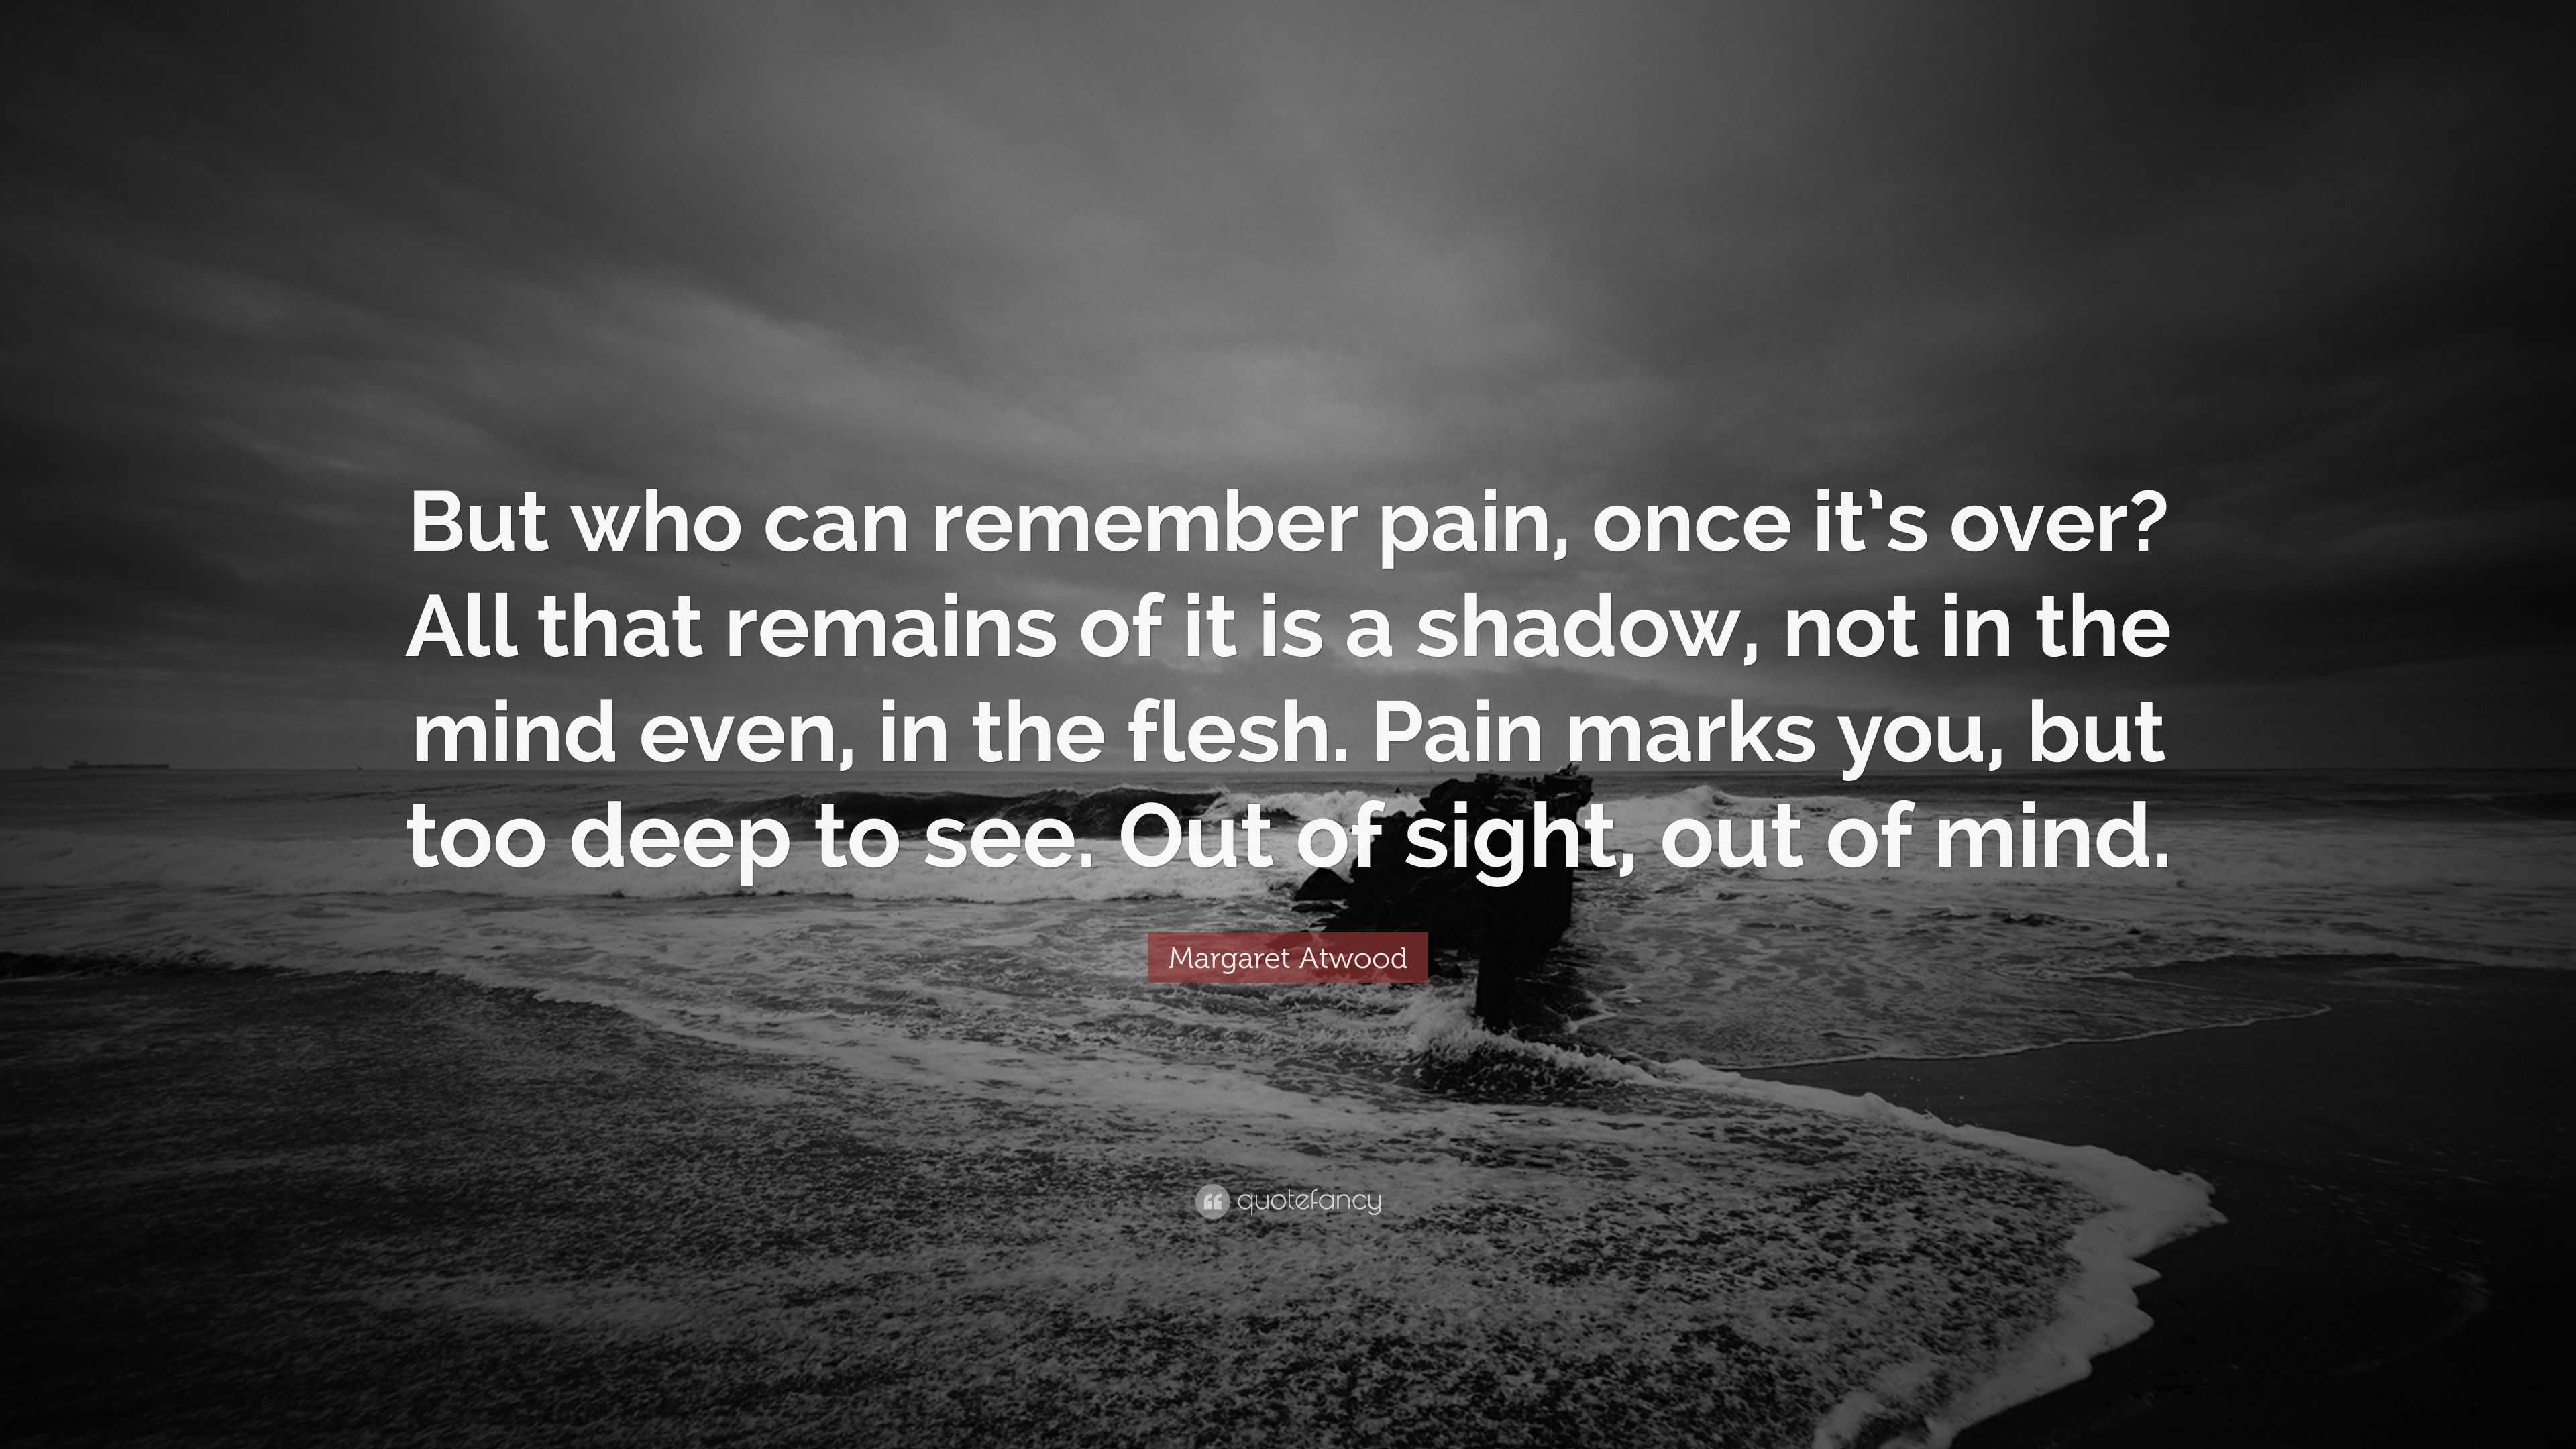 Margaret Atwood Quote: “But who can remember pain, once it’s over? All ...